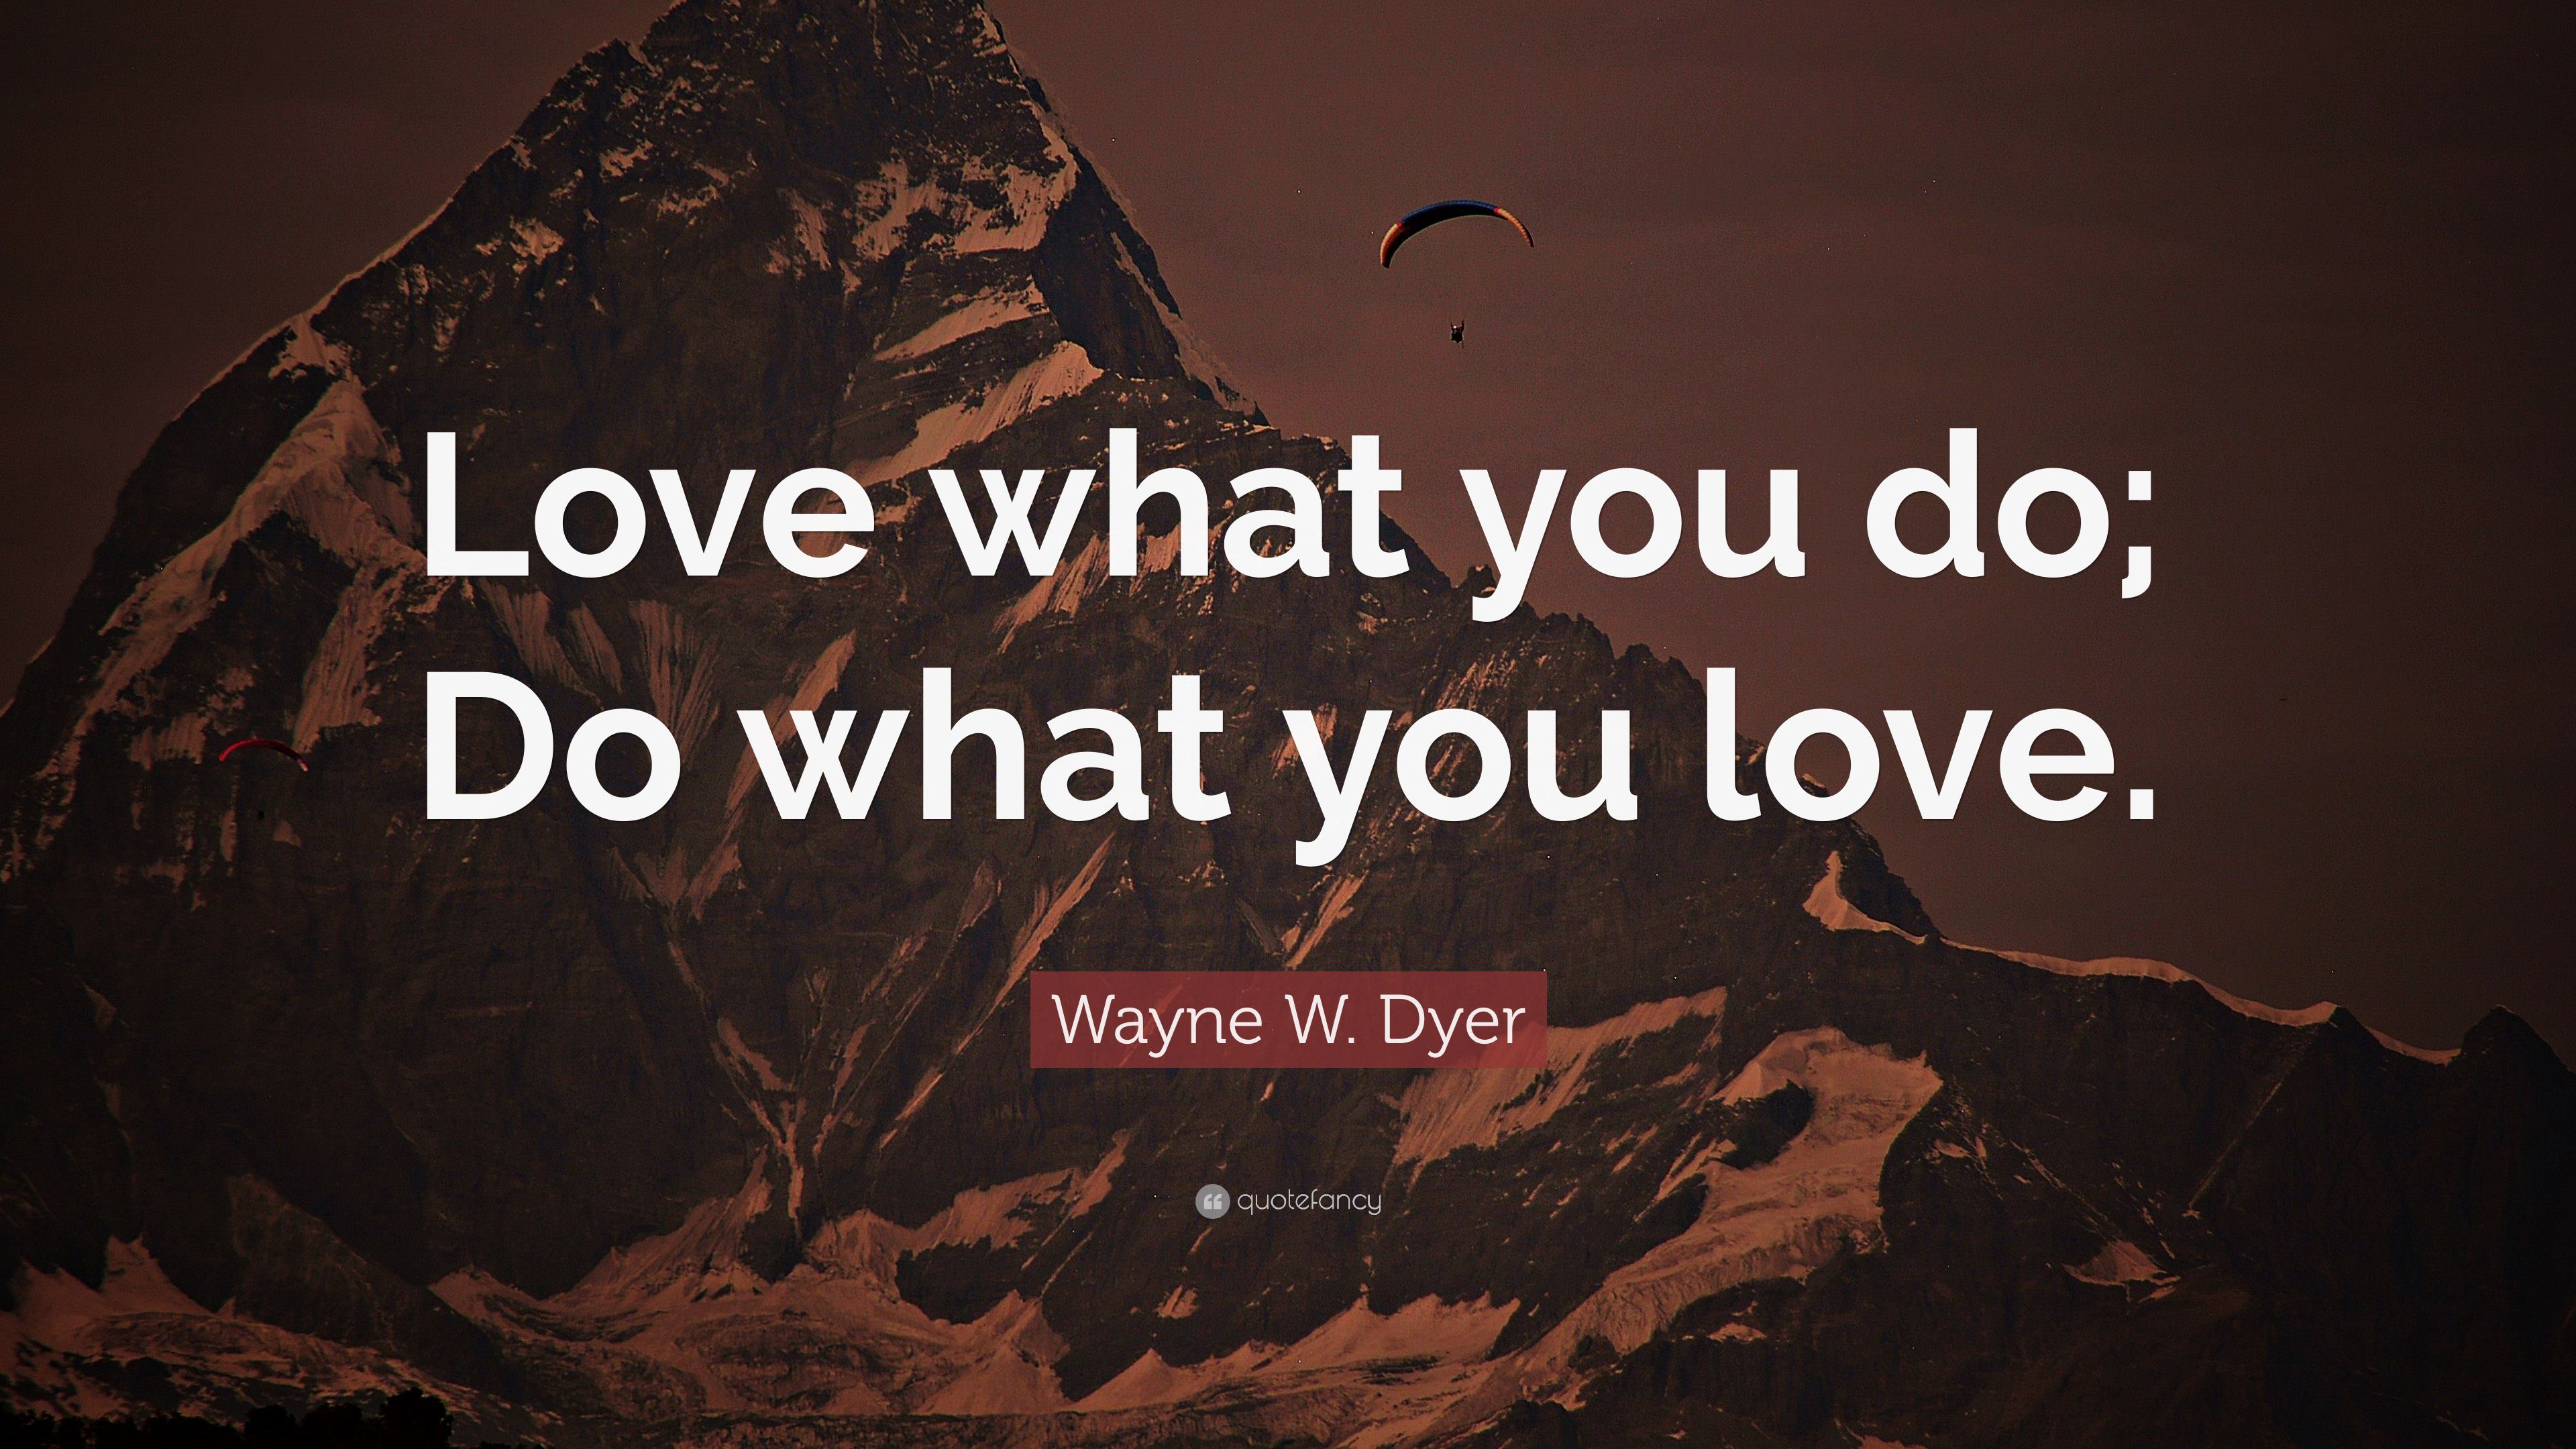 Wayne W. Dyer Quote: “Love what you do; Do what you love.”